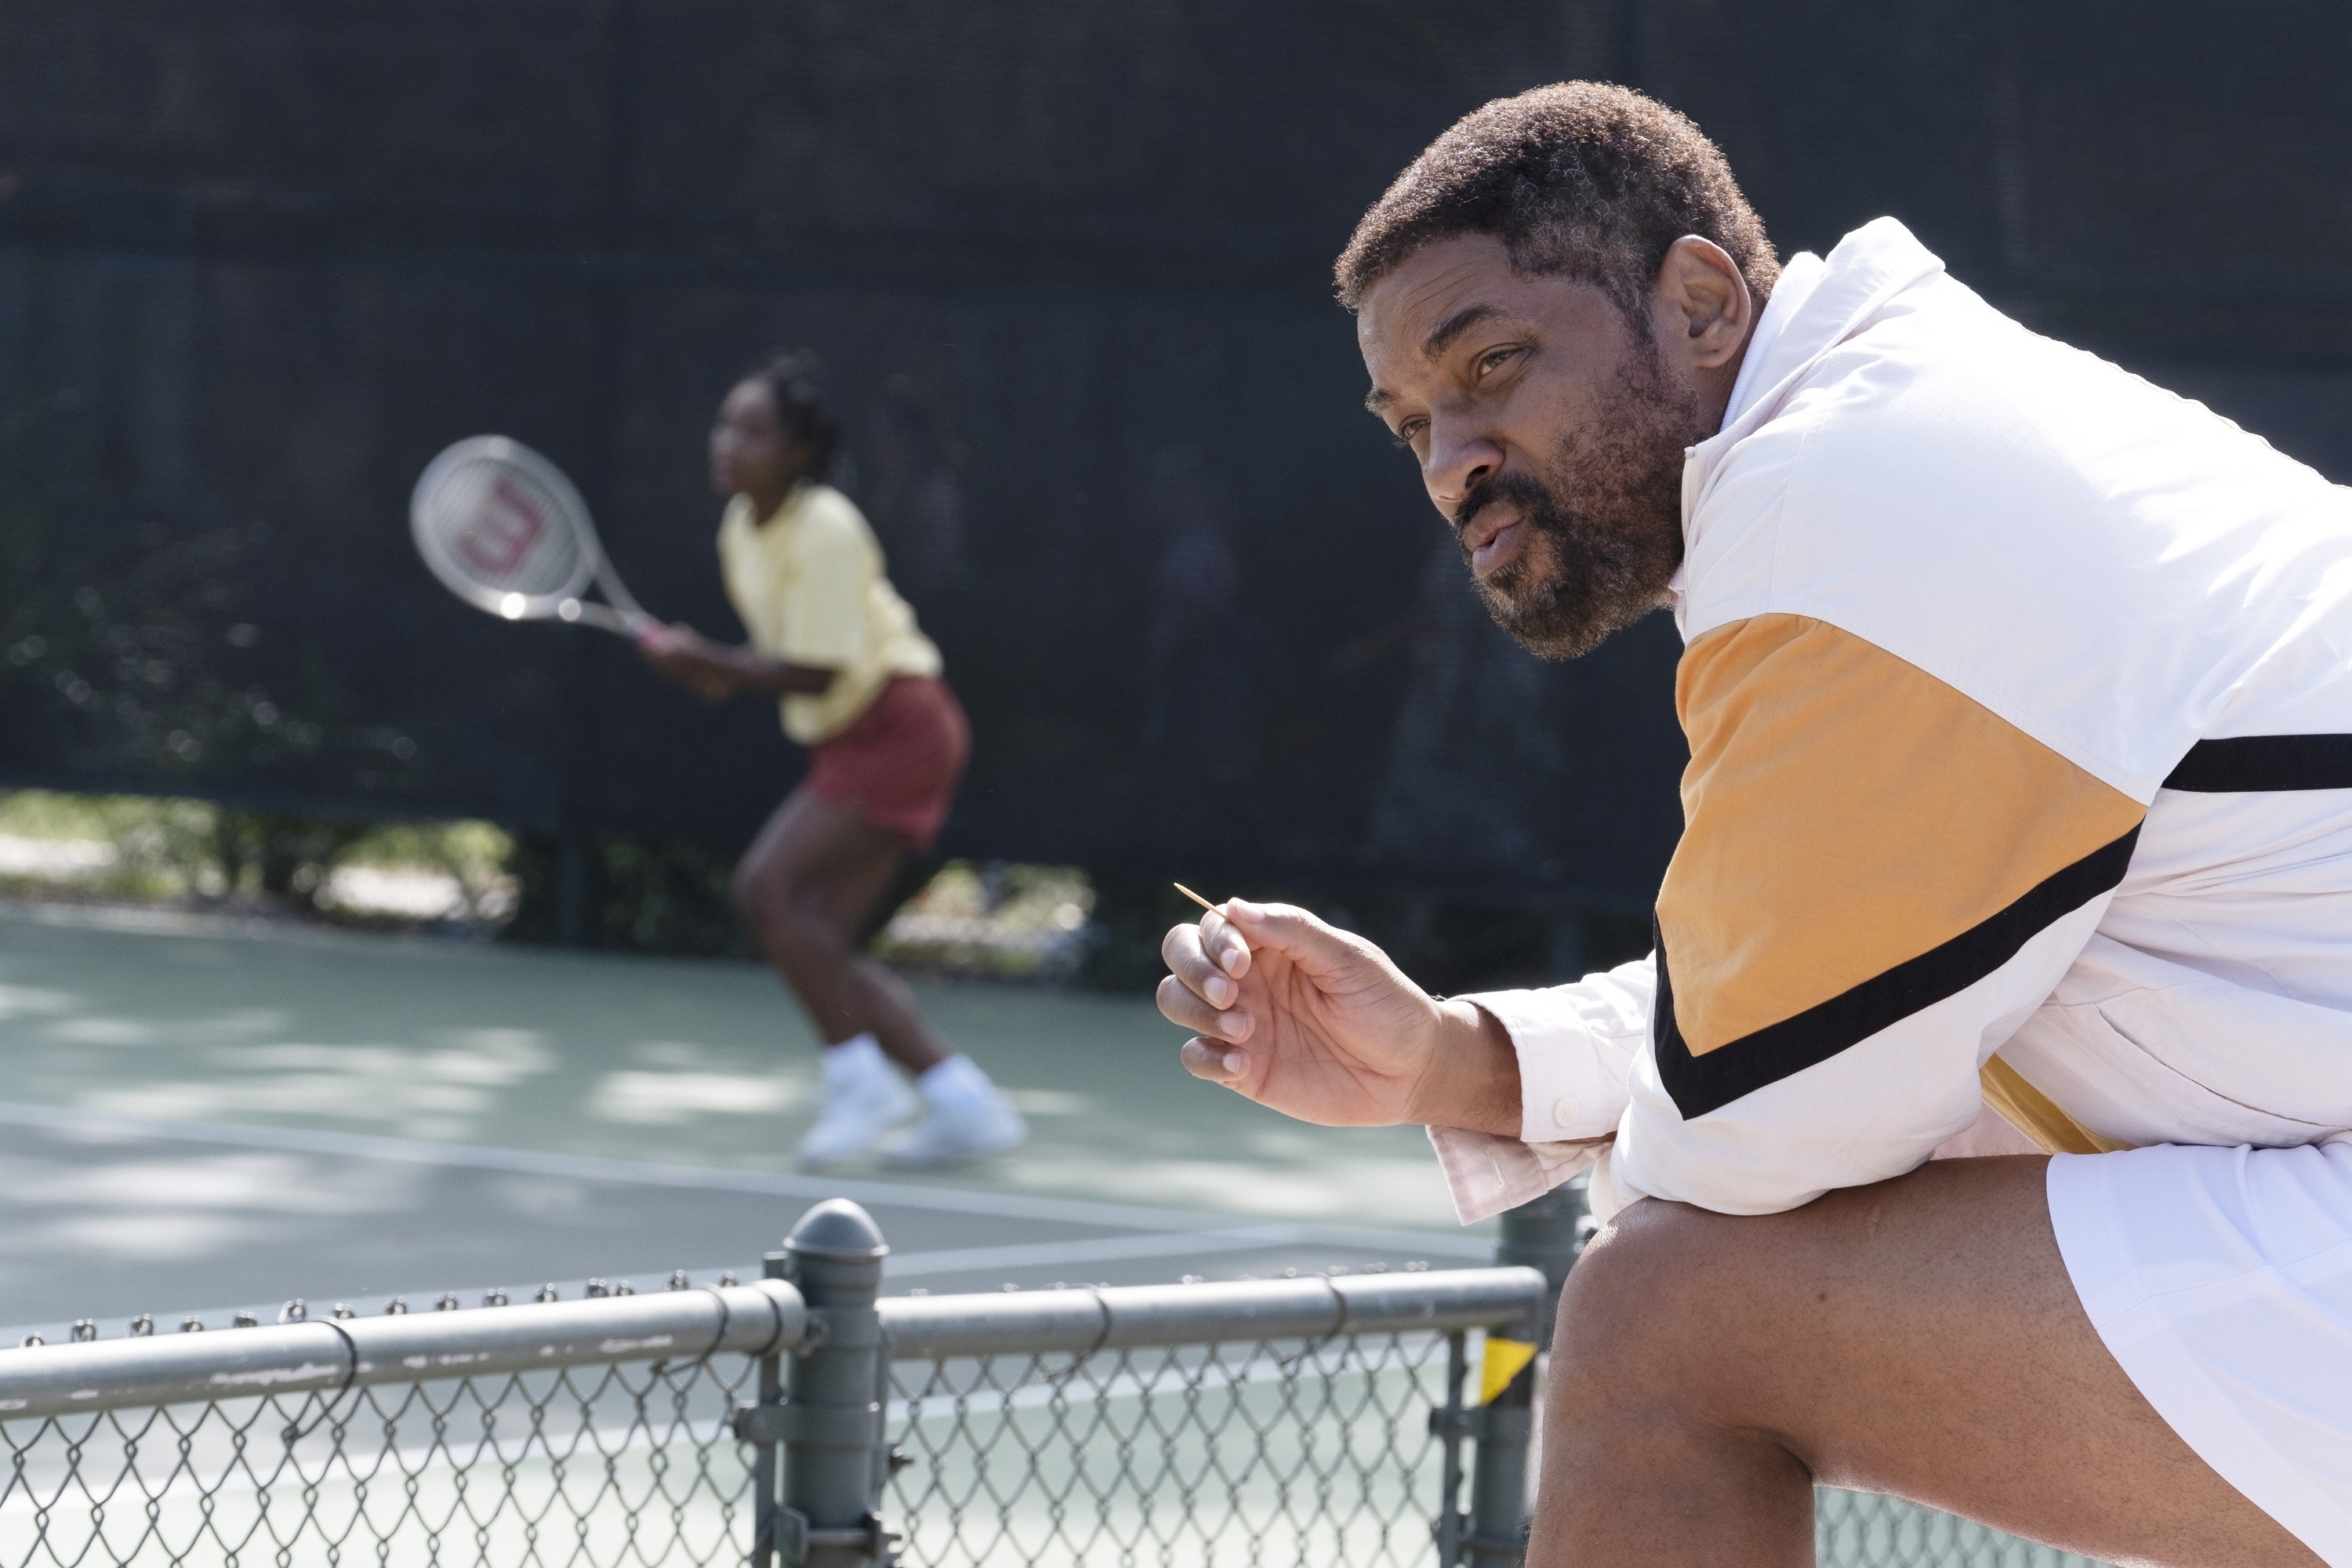 Will Smith smokes a cigarette while watching tennis